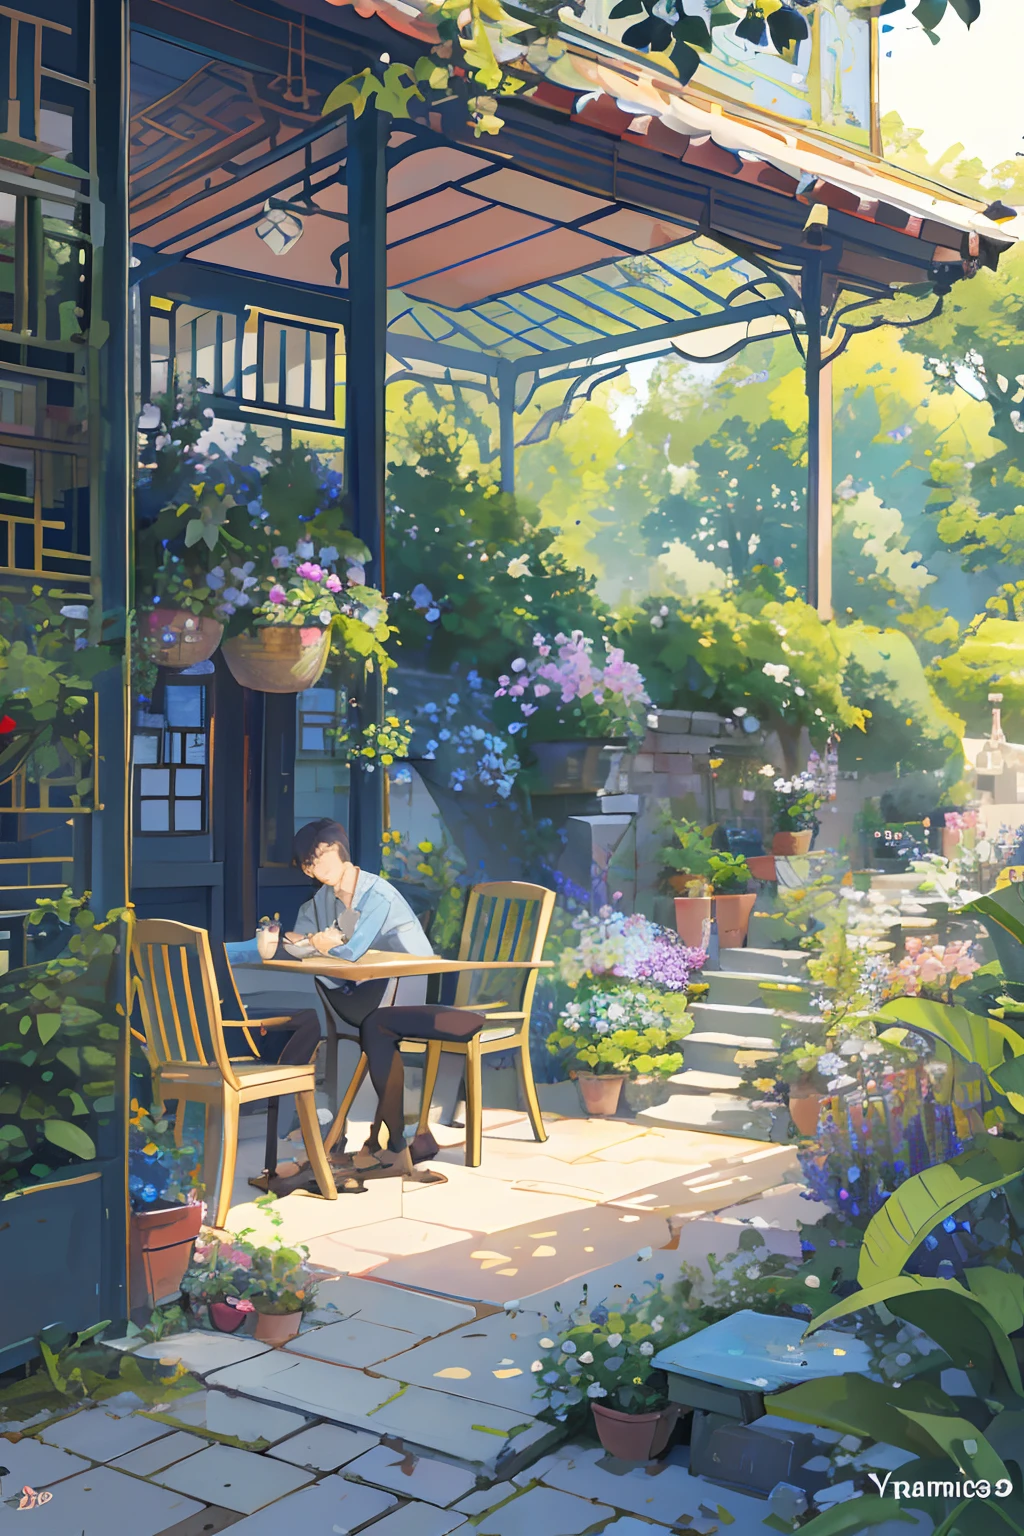 In the garden there are drawings of tables and chairs, relaxing concept art, 　cozy cafe background, by Yang J, afternoon hangout, Plant and flower environment, Cozy place, Relaxing environment, by Aleksander Gine, By Raymond Han, by Victor Wang, Summer afternoon, relax vibe, art nouveau environment, by Zhou Chen, immensely detailed scene, by Yanjun Cheng